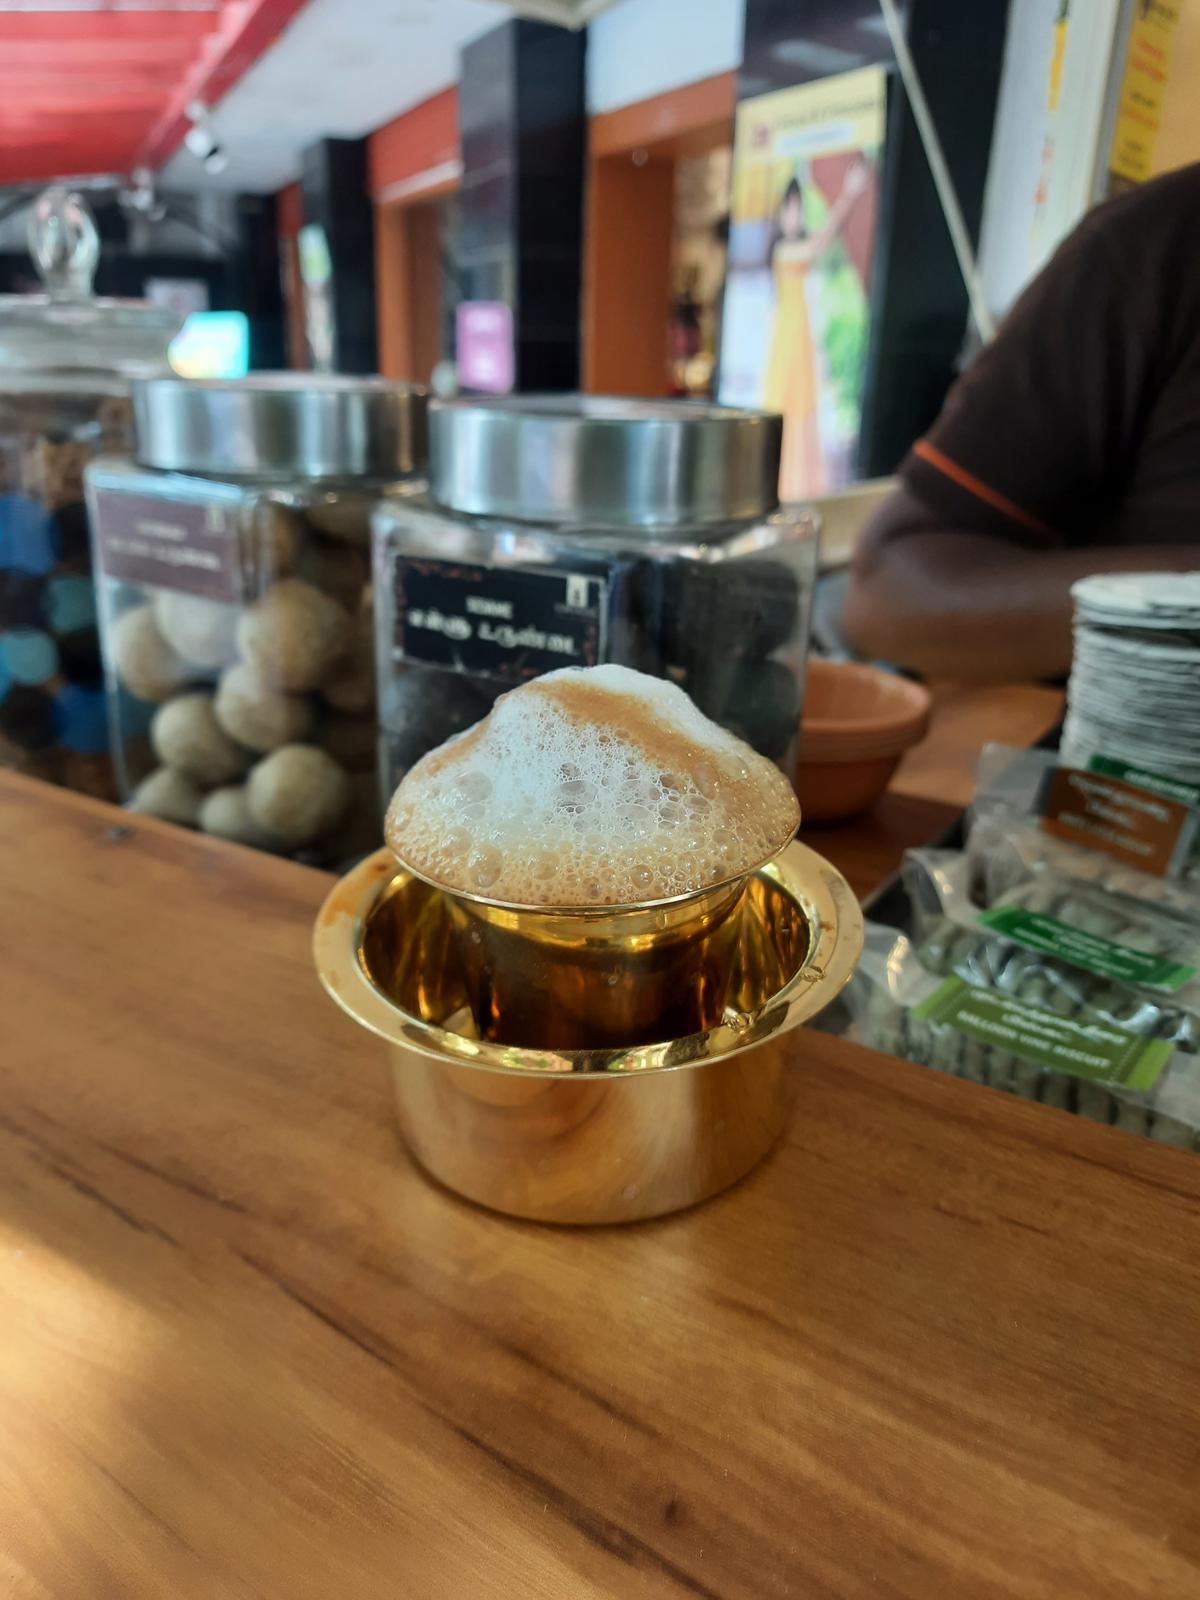 Filter coffee is priced at ₹20 at the outlet